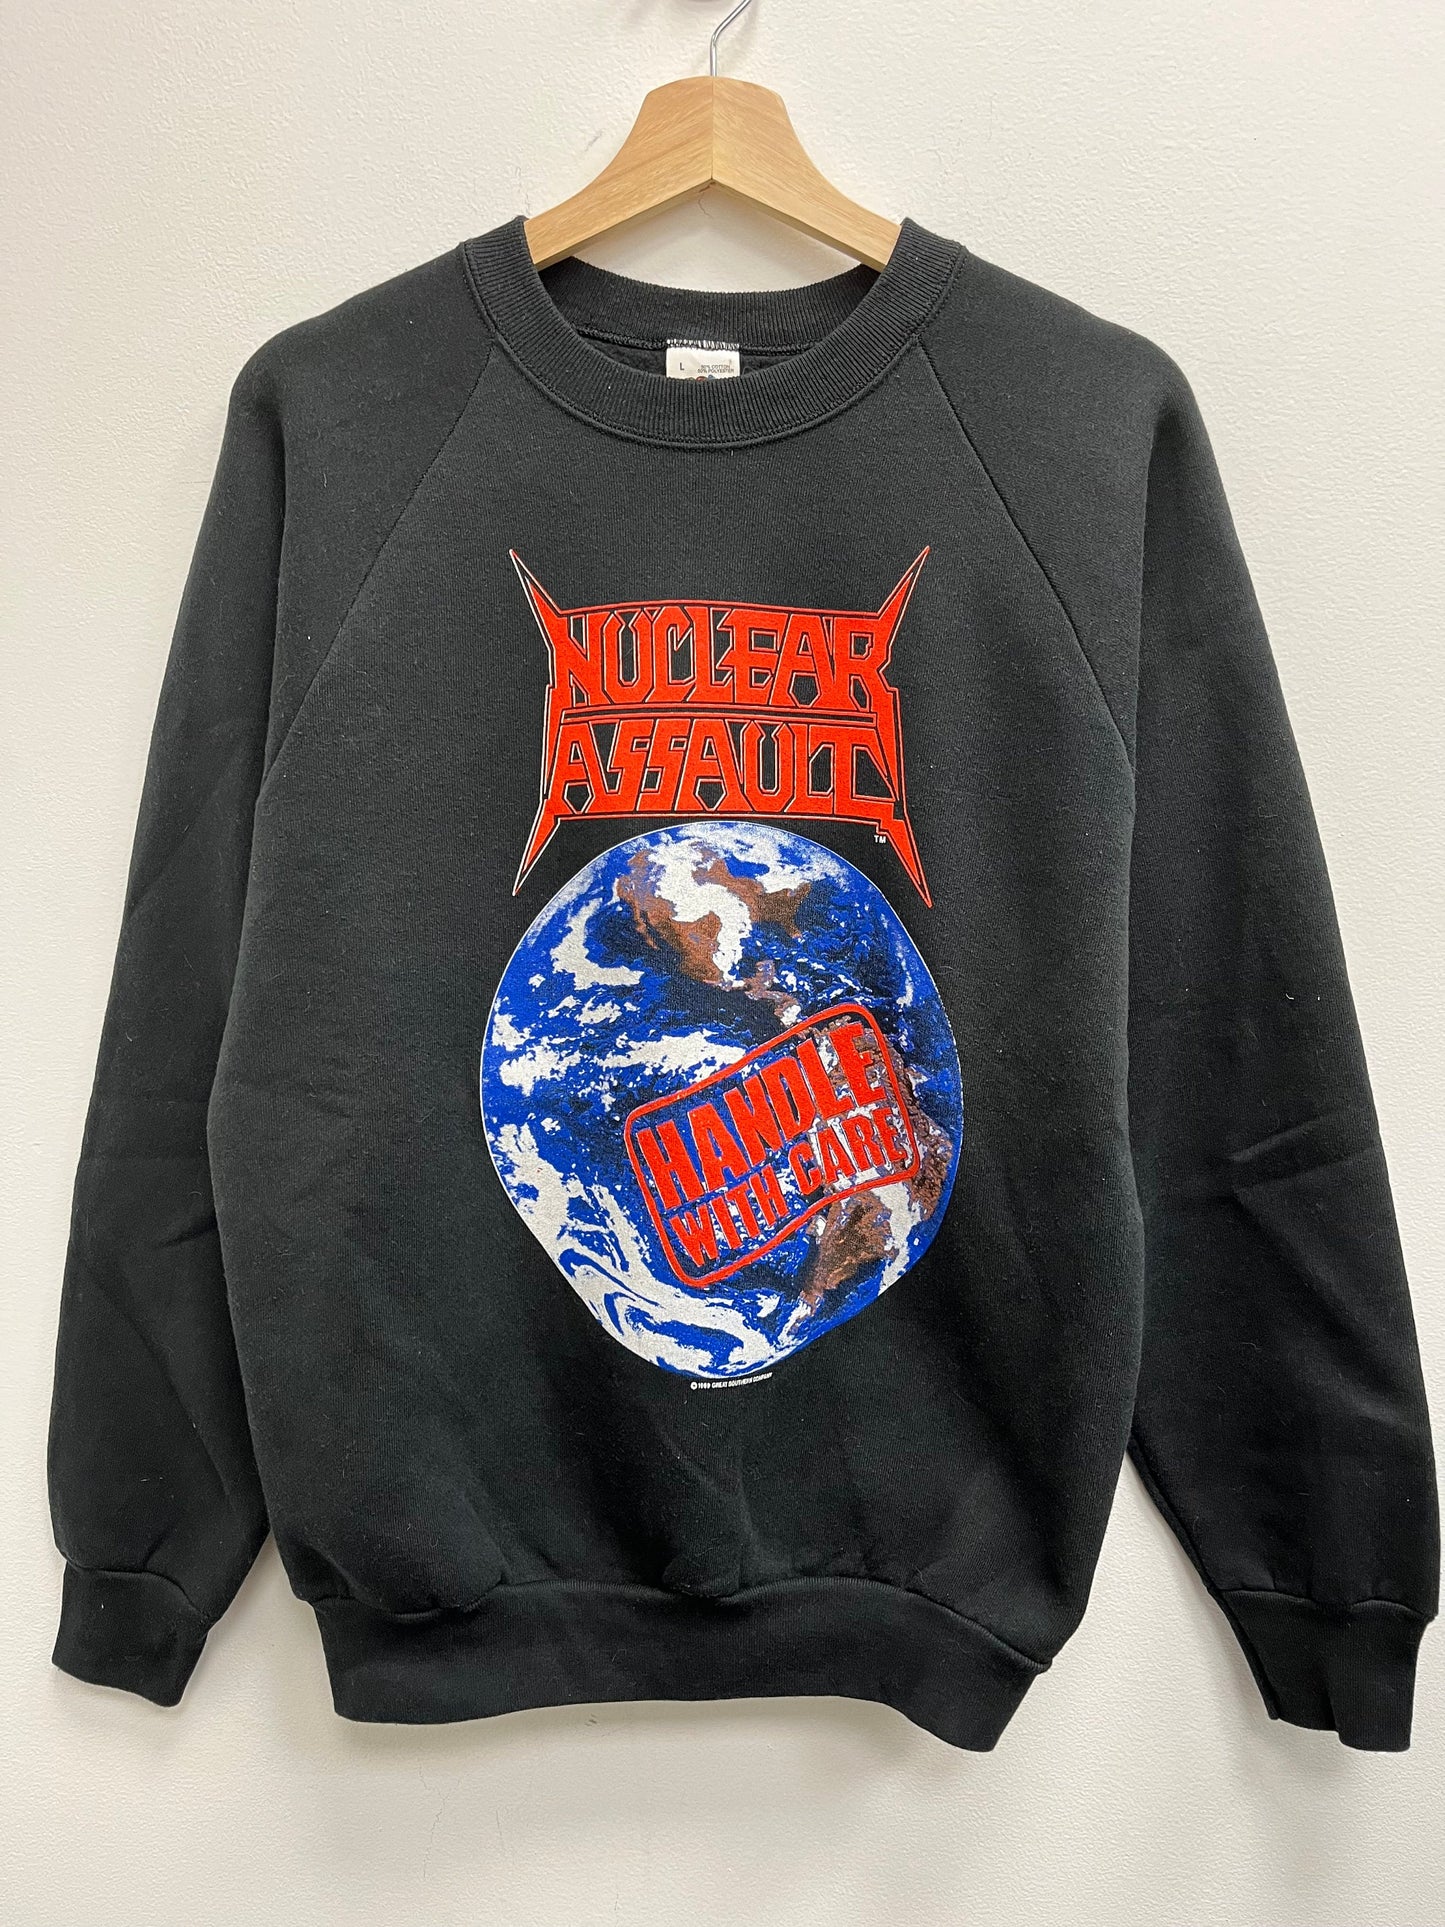 Vintage 1980’s Nuclear Assault Handle With Care Crewneck